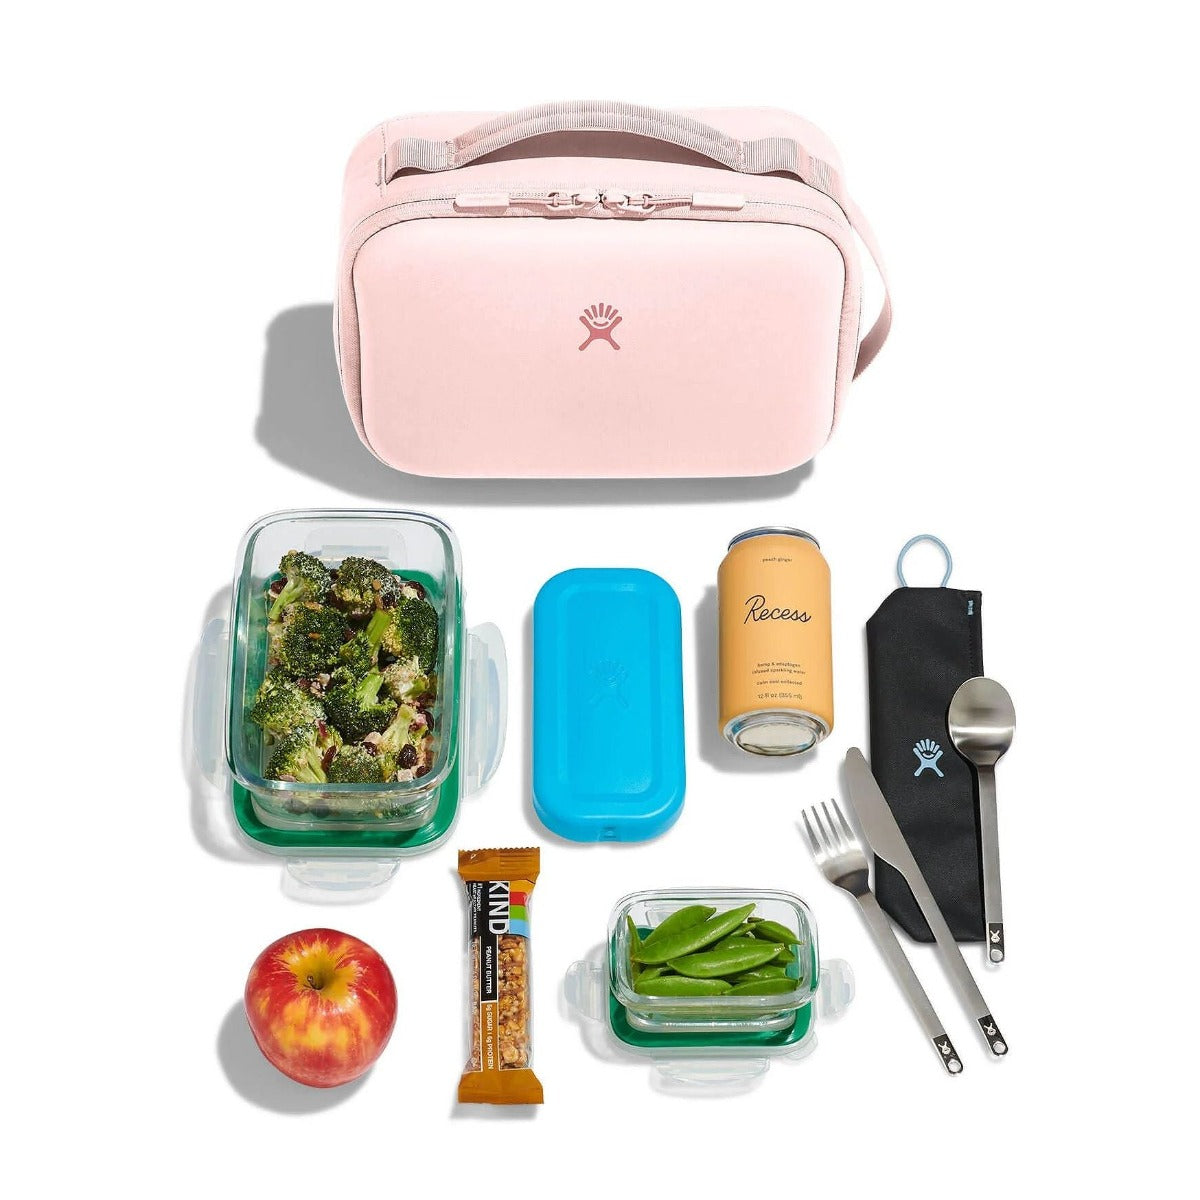 Eat your food wherever the trail takes you with the Hydro Flask Carry Out Insulated Lunch Box.